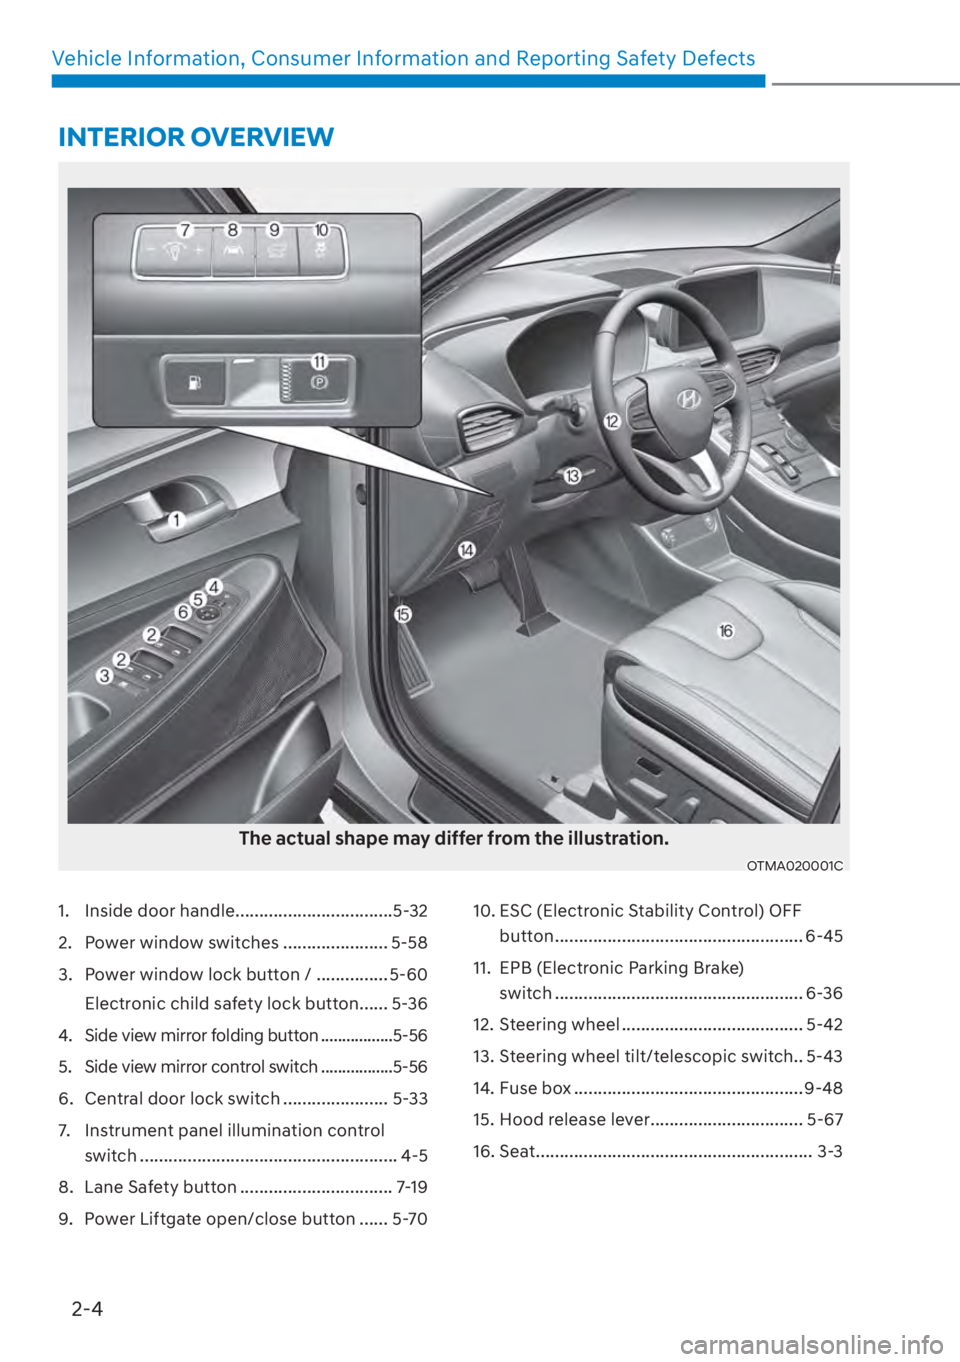 HYUNDAI SANTA FE 2023  Owners Manual 2-4
Vehicle Information, Consumer Information and Reporting Safety Defects
1.  Inside door handle .................................5-32
2.  Power window switches ...................... 5-58
3.  Power 